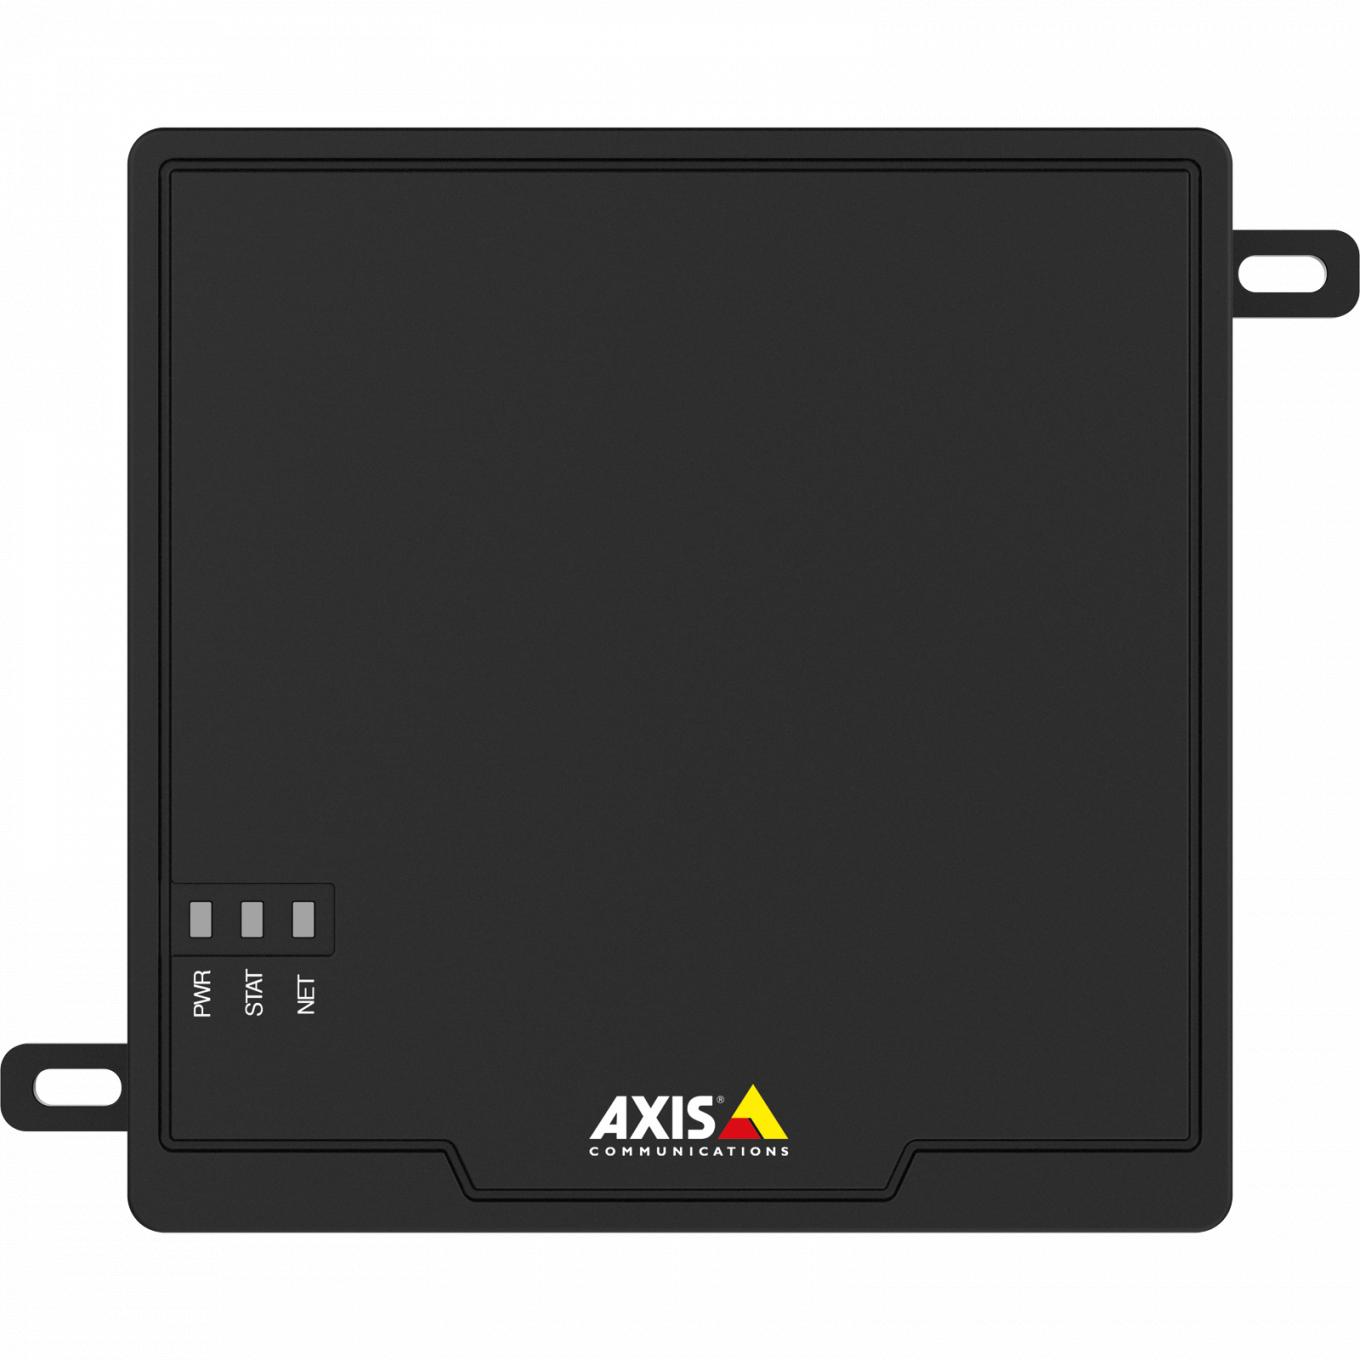 AXIS F34 Main Unit mounted on wall from front